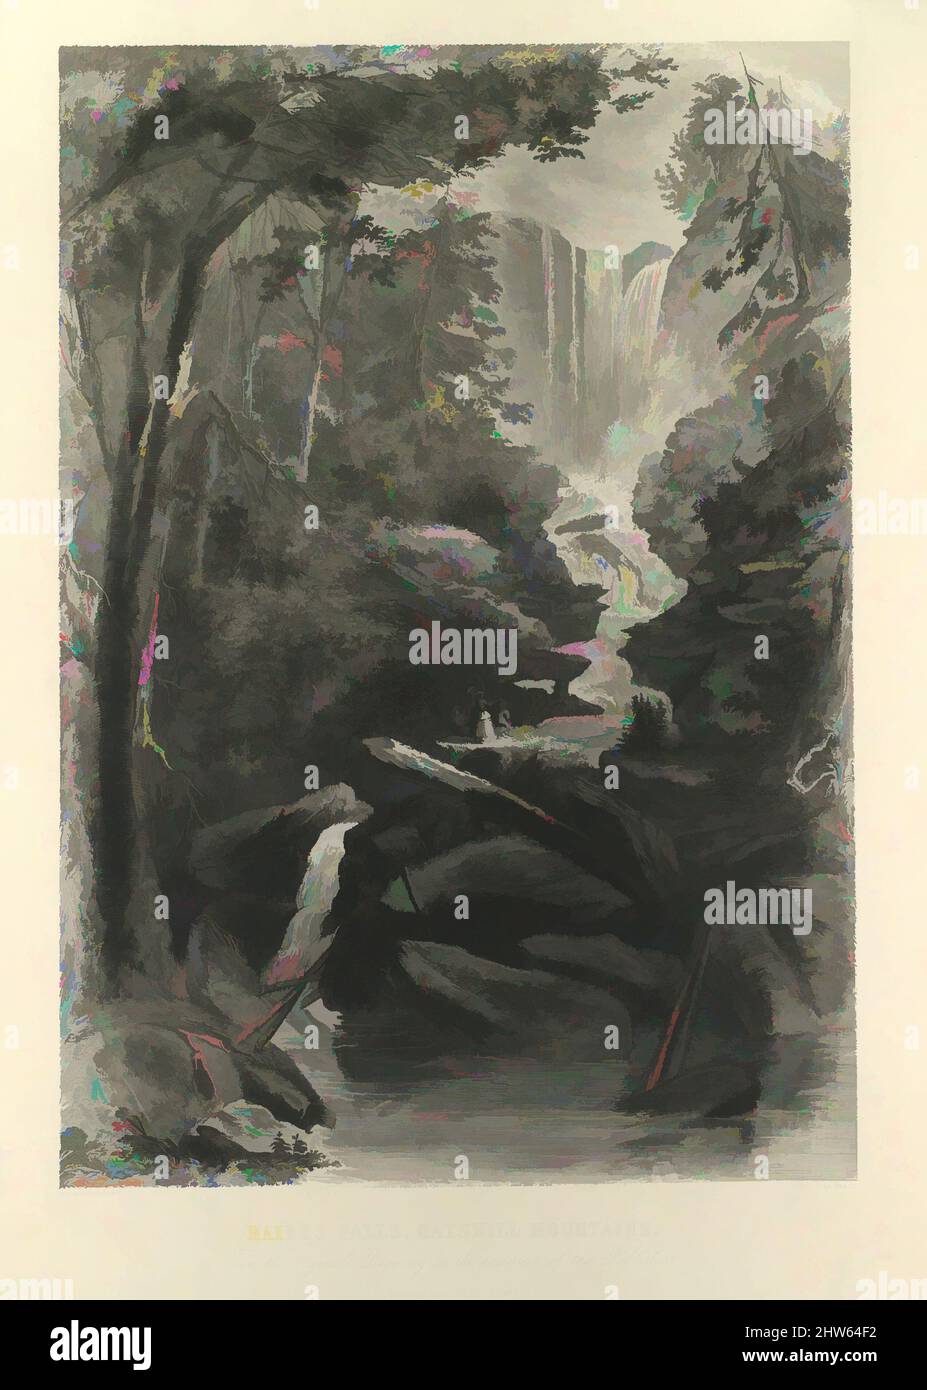 Art inspired by Haines Falls, Catskill Mountains, 1869, Steel engraving, sheet: 16 3/16 x 12 7/16 in. (41.1 x 31.6 cm), Prints, Engraved by Joseph Ives Pease (American, Norfolk, Connecticut 1809–1883 Salisbury, Connecticut), After William (Wilhelm) Momberger (American (born Germany, Classic works modernized by Artotop with a splash of modernity. Shapes, color and value, eye-catching visual impact on art. Emotions through freedom of artworks in a contemporary way. A timeless message pursuing a wildly creative new direction. Artists turning to the digital medium and creating the Artotop NFT Stock Photo